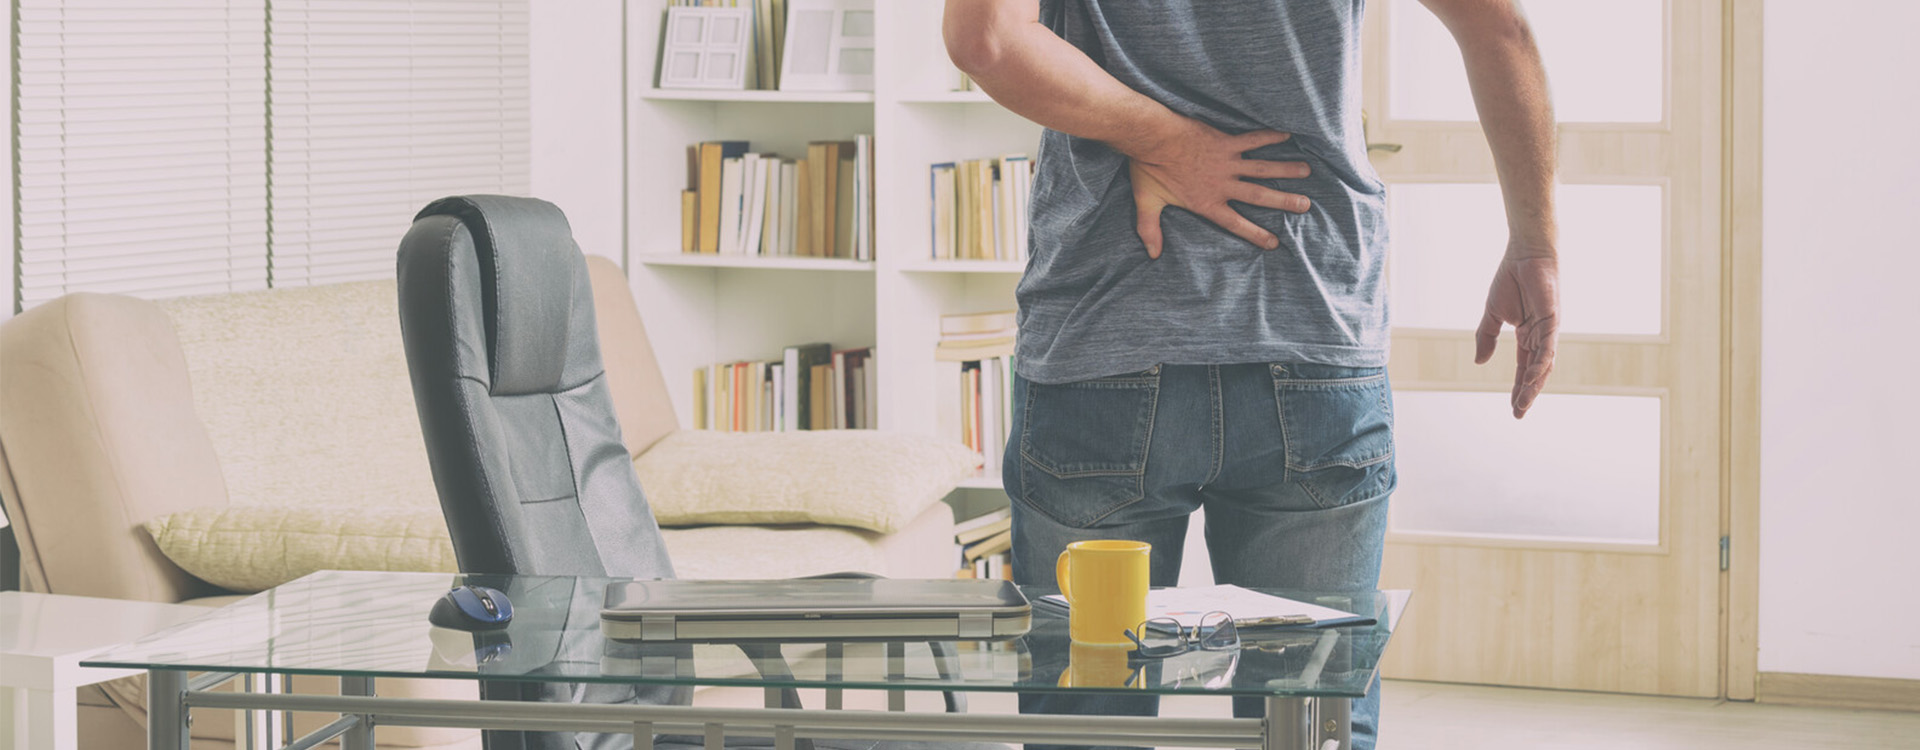 Treating low back pain with electrotherapy - Enovis